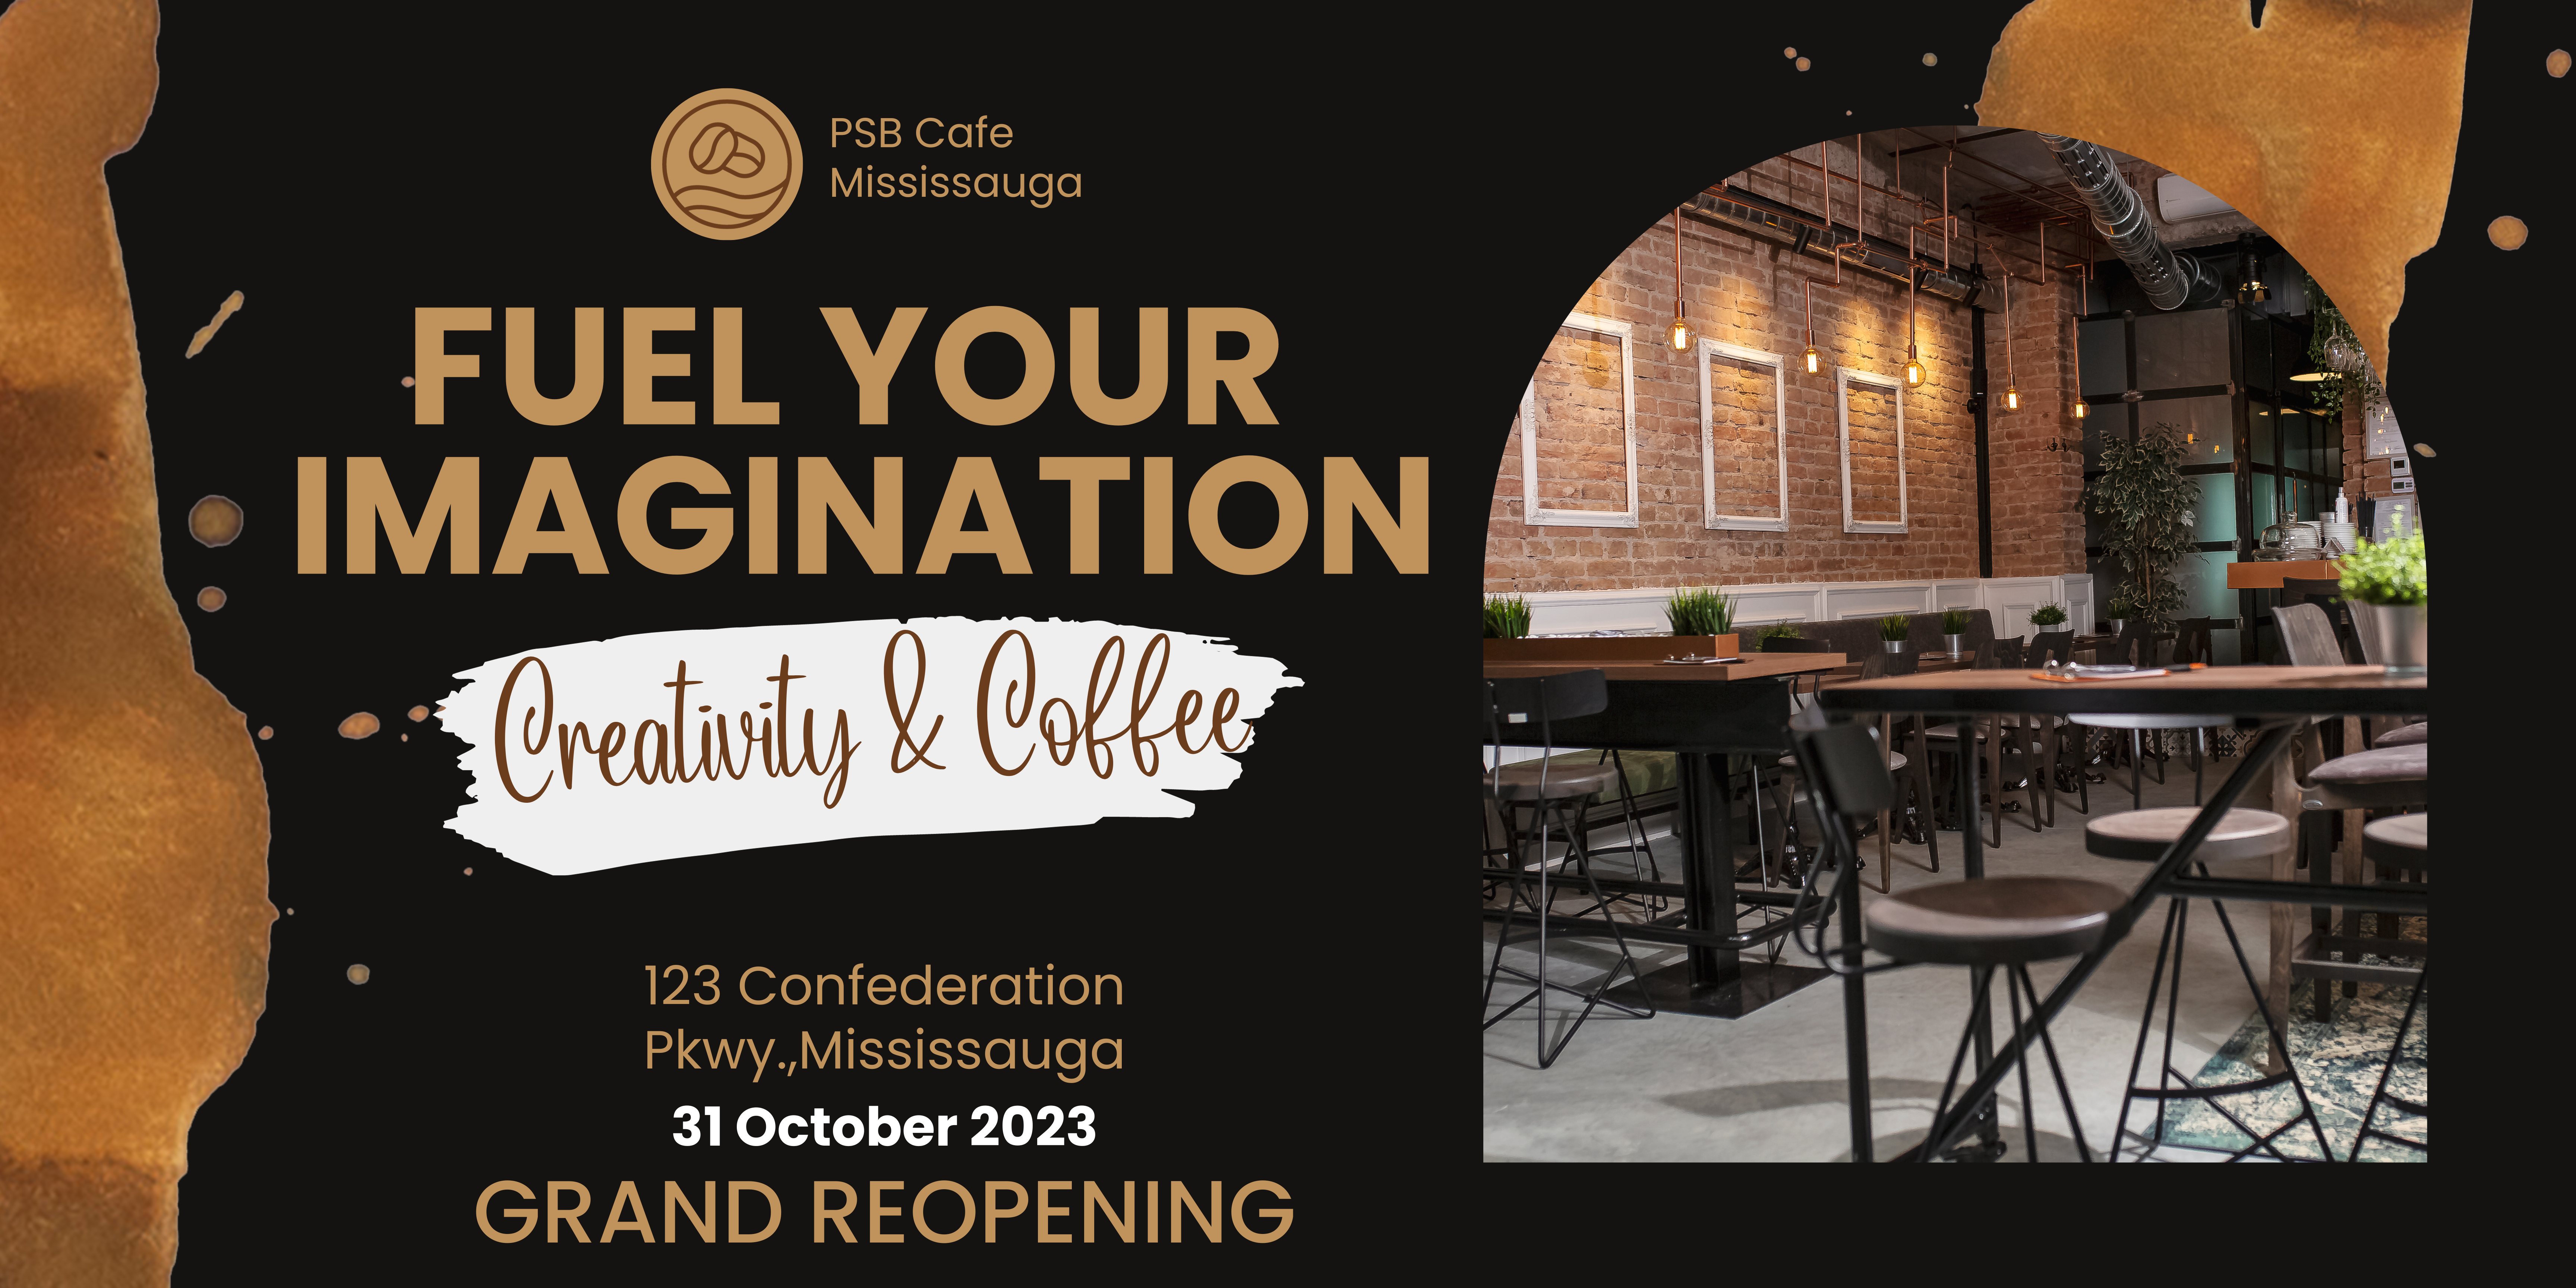 PSB Cafe reopening on October 31st, 2023, and will be offering alluring innovative coffee, store address 123 Confederation Pkwy, Mississauga